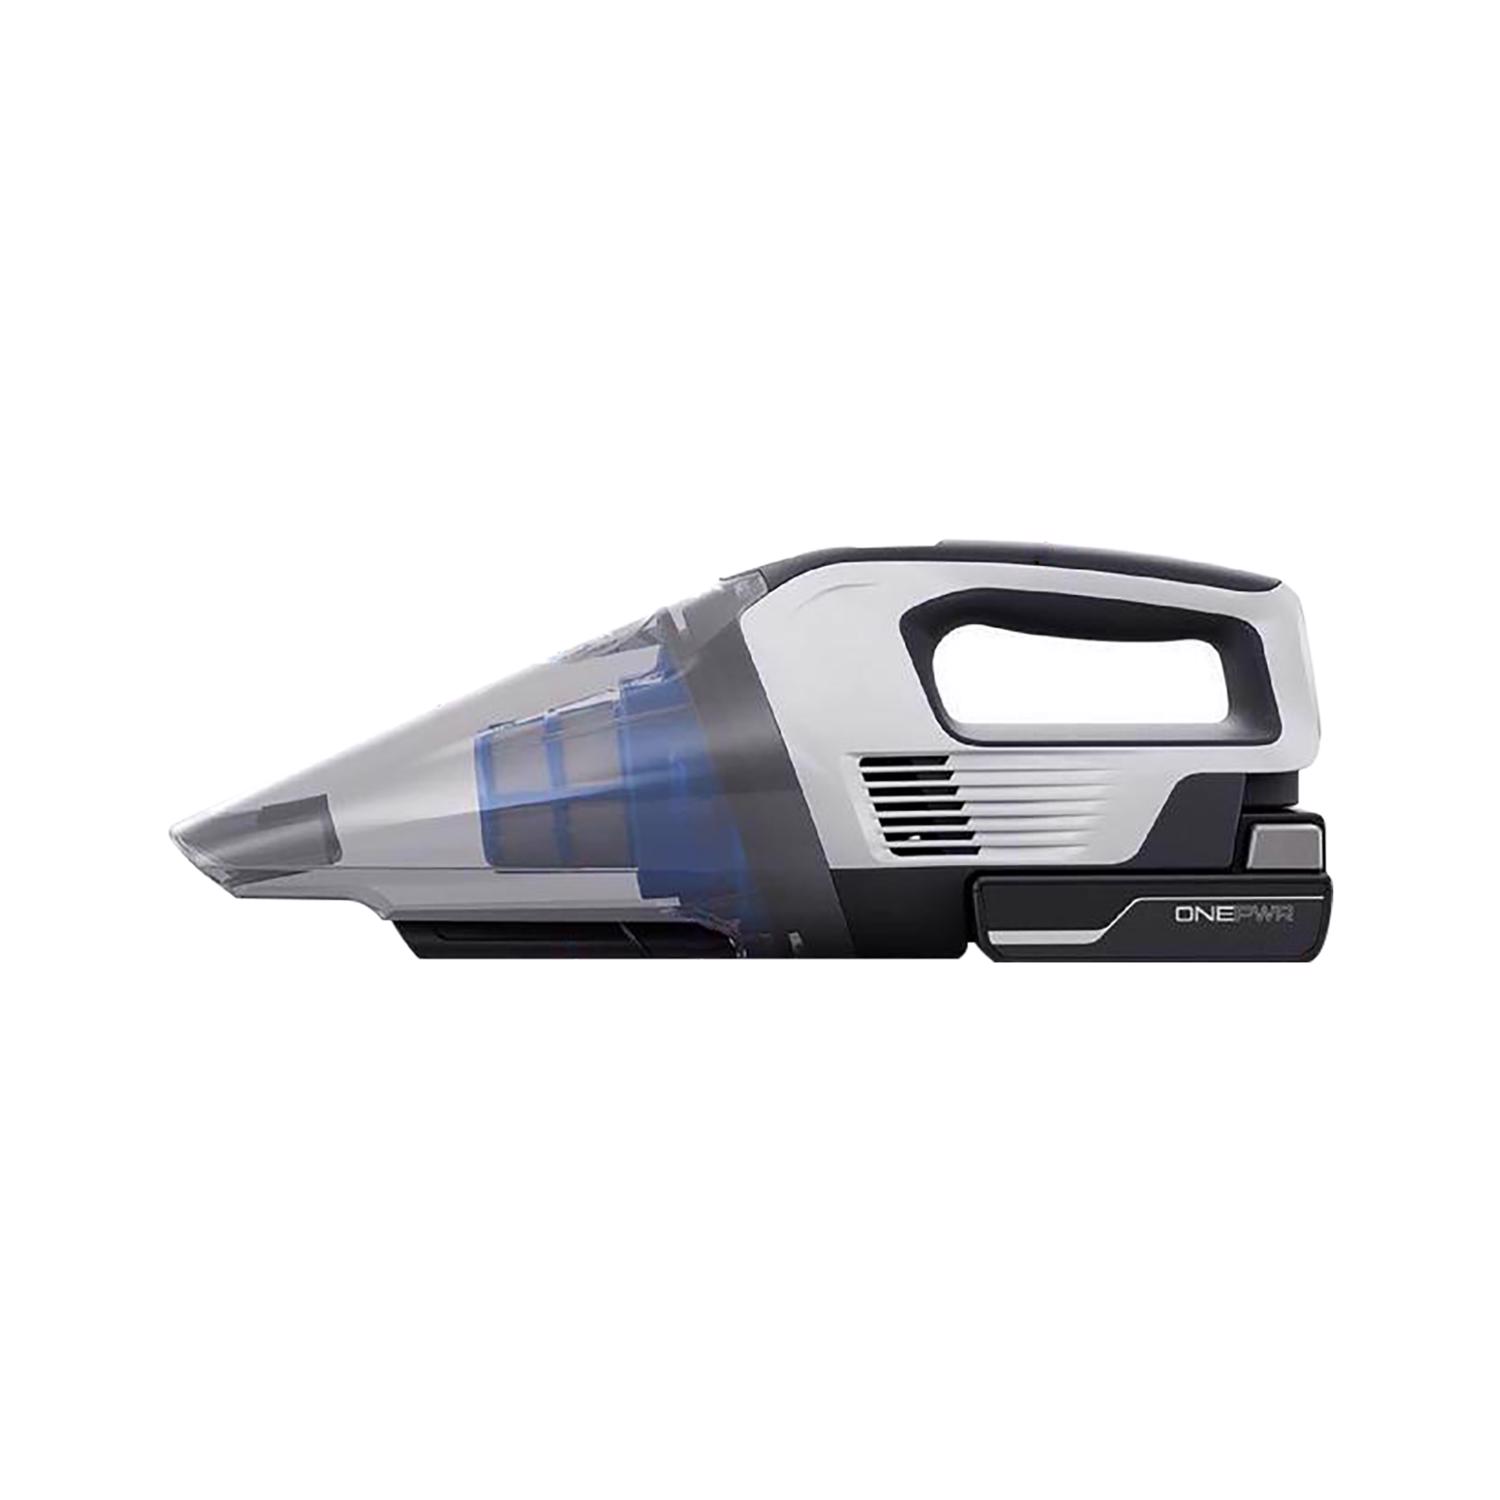 Photos - Vacuum Cleaner Hoover ONEPWR Bagless Cordless Standard Filter Hand Vacuum BH57005ID 